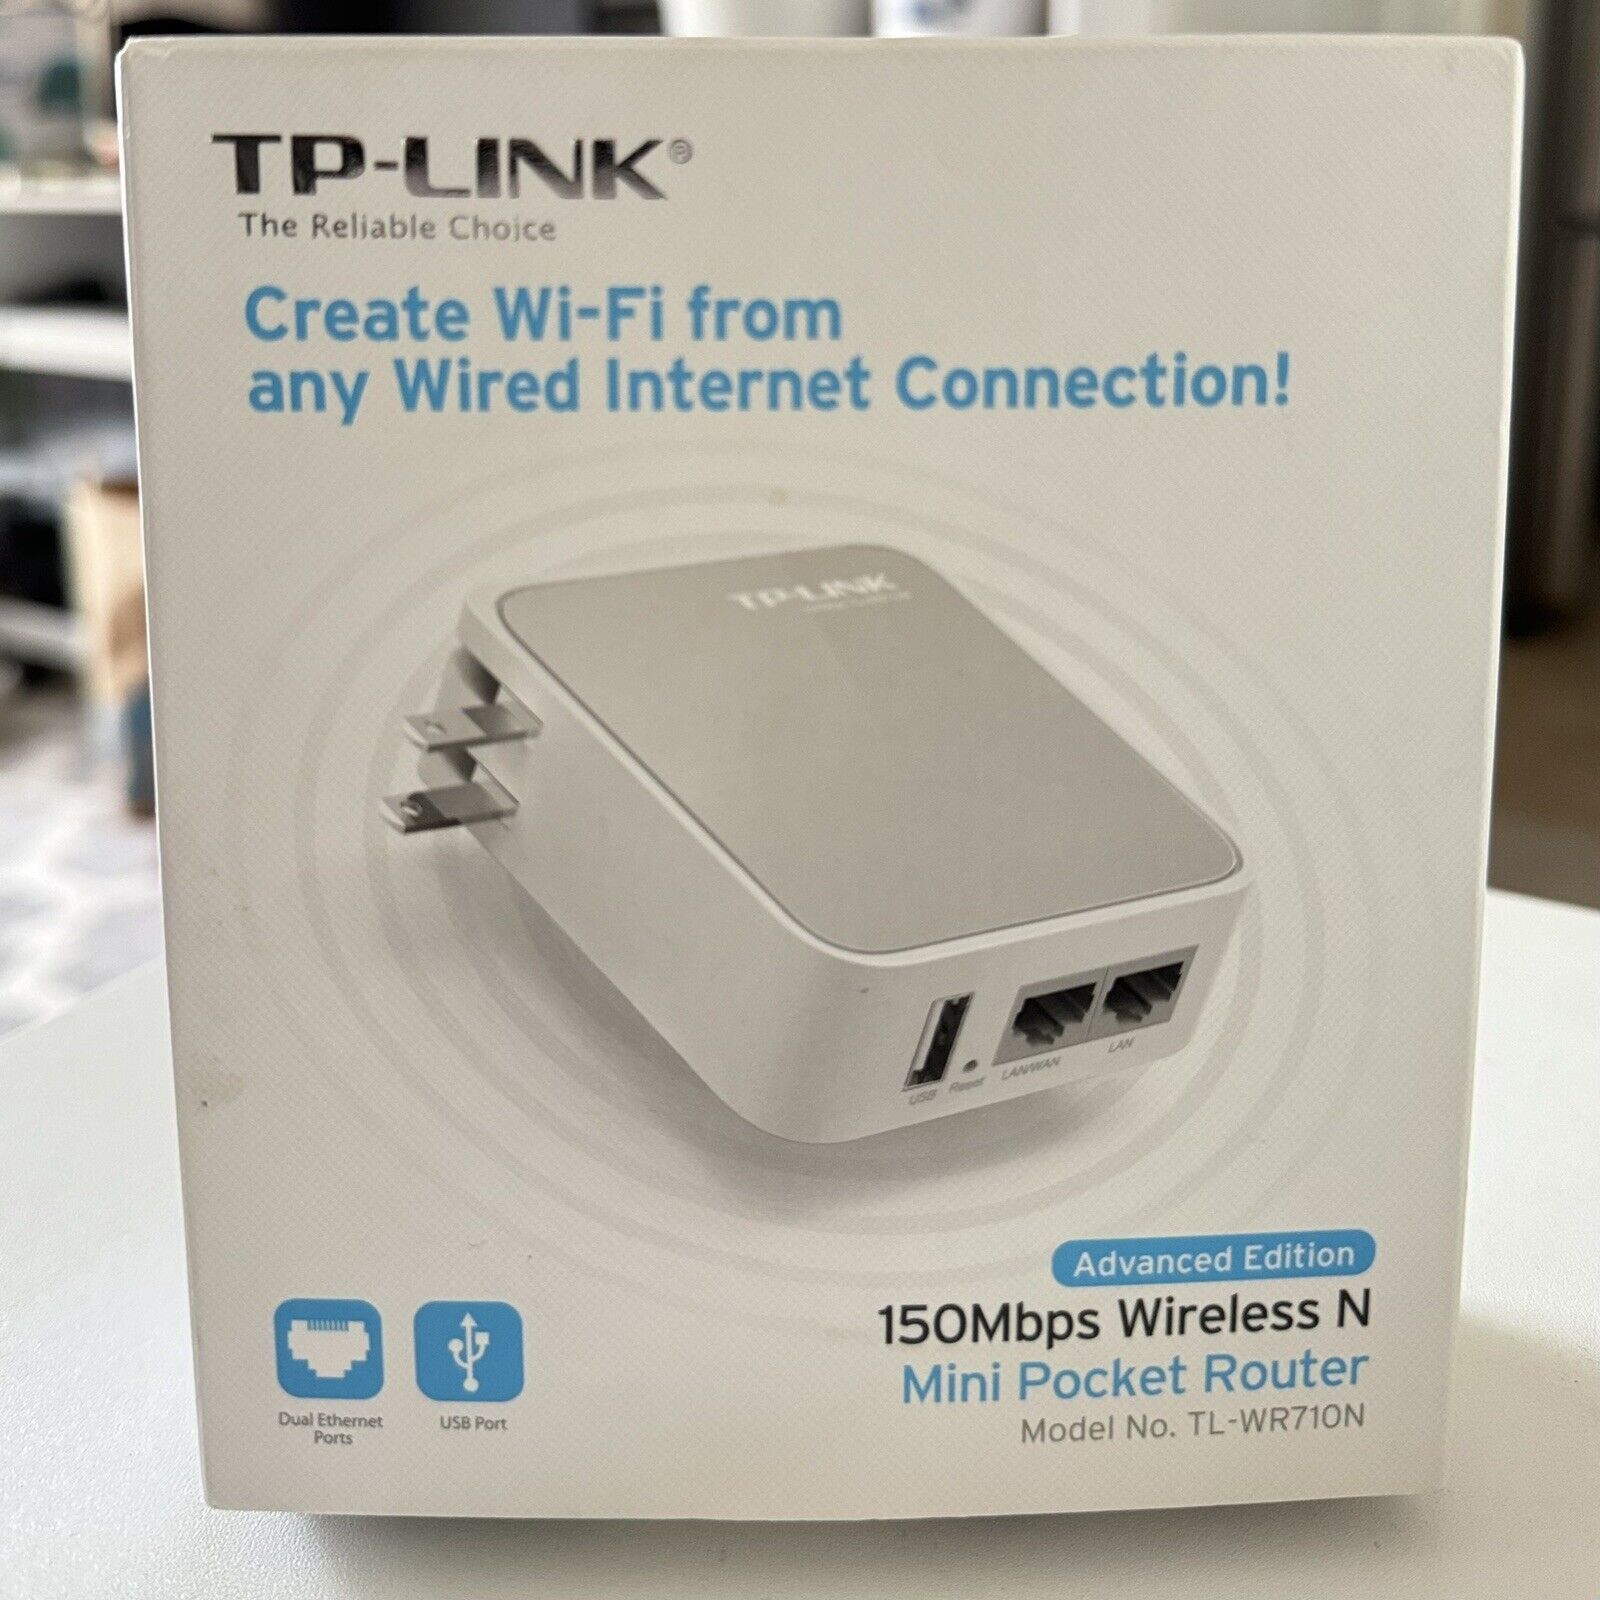 NEW TP-LINK TL-WR710N 150Mbps Wireless N Mini Pocket Router